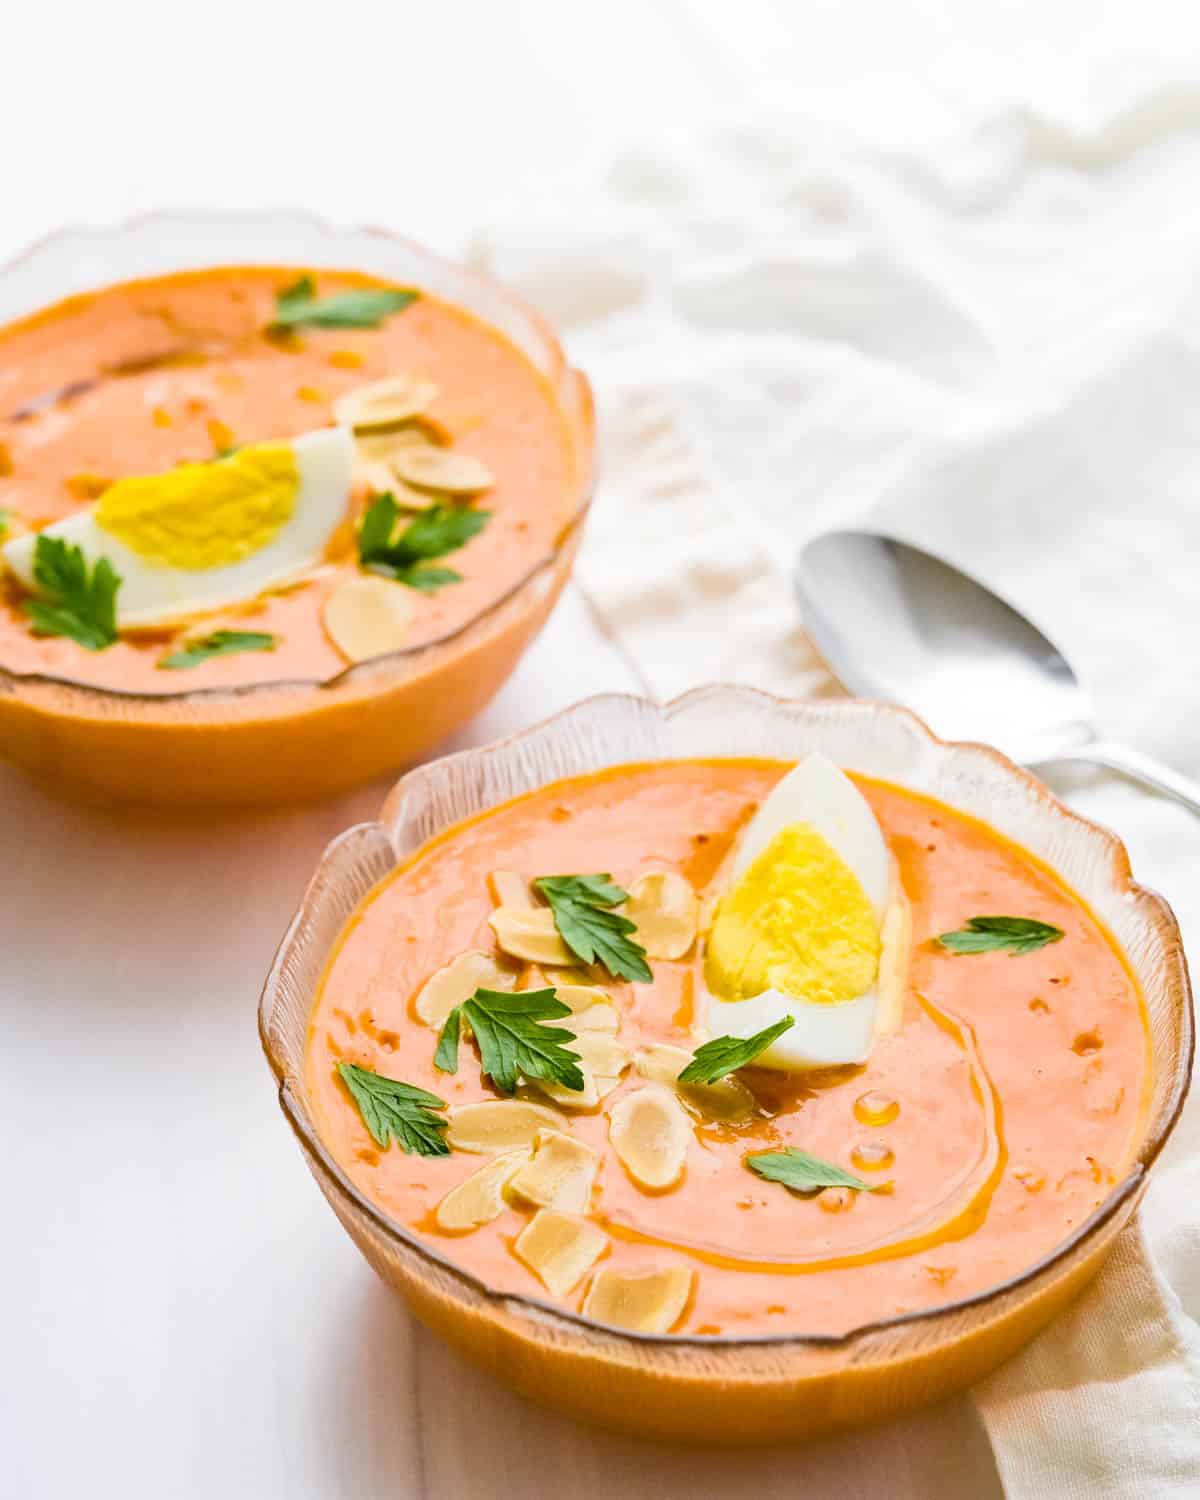 Traditional garnishes for Spanish tomato soup are hard boiled eggs, toasted almonds and a drizzle of oil.